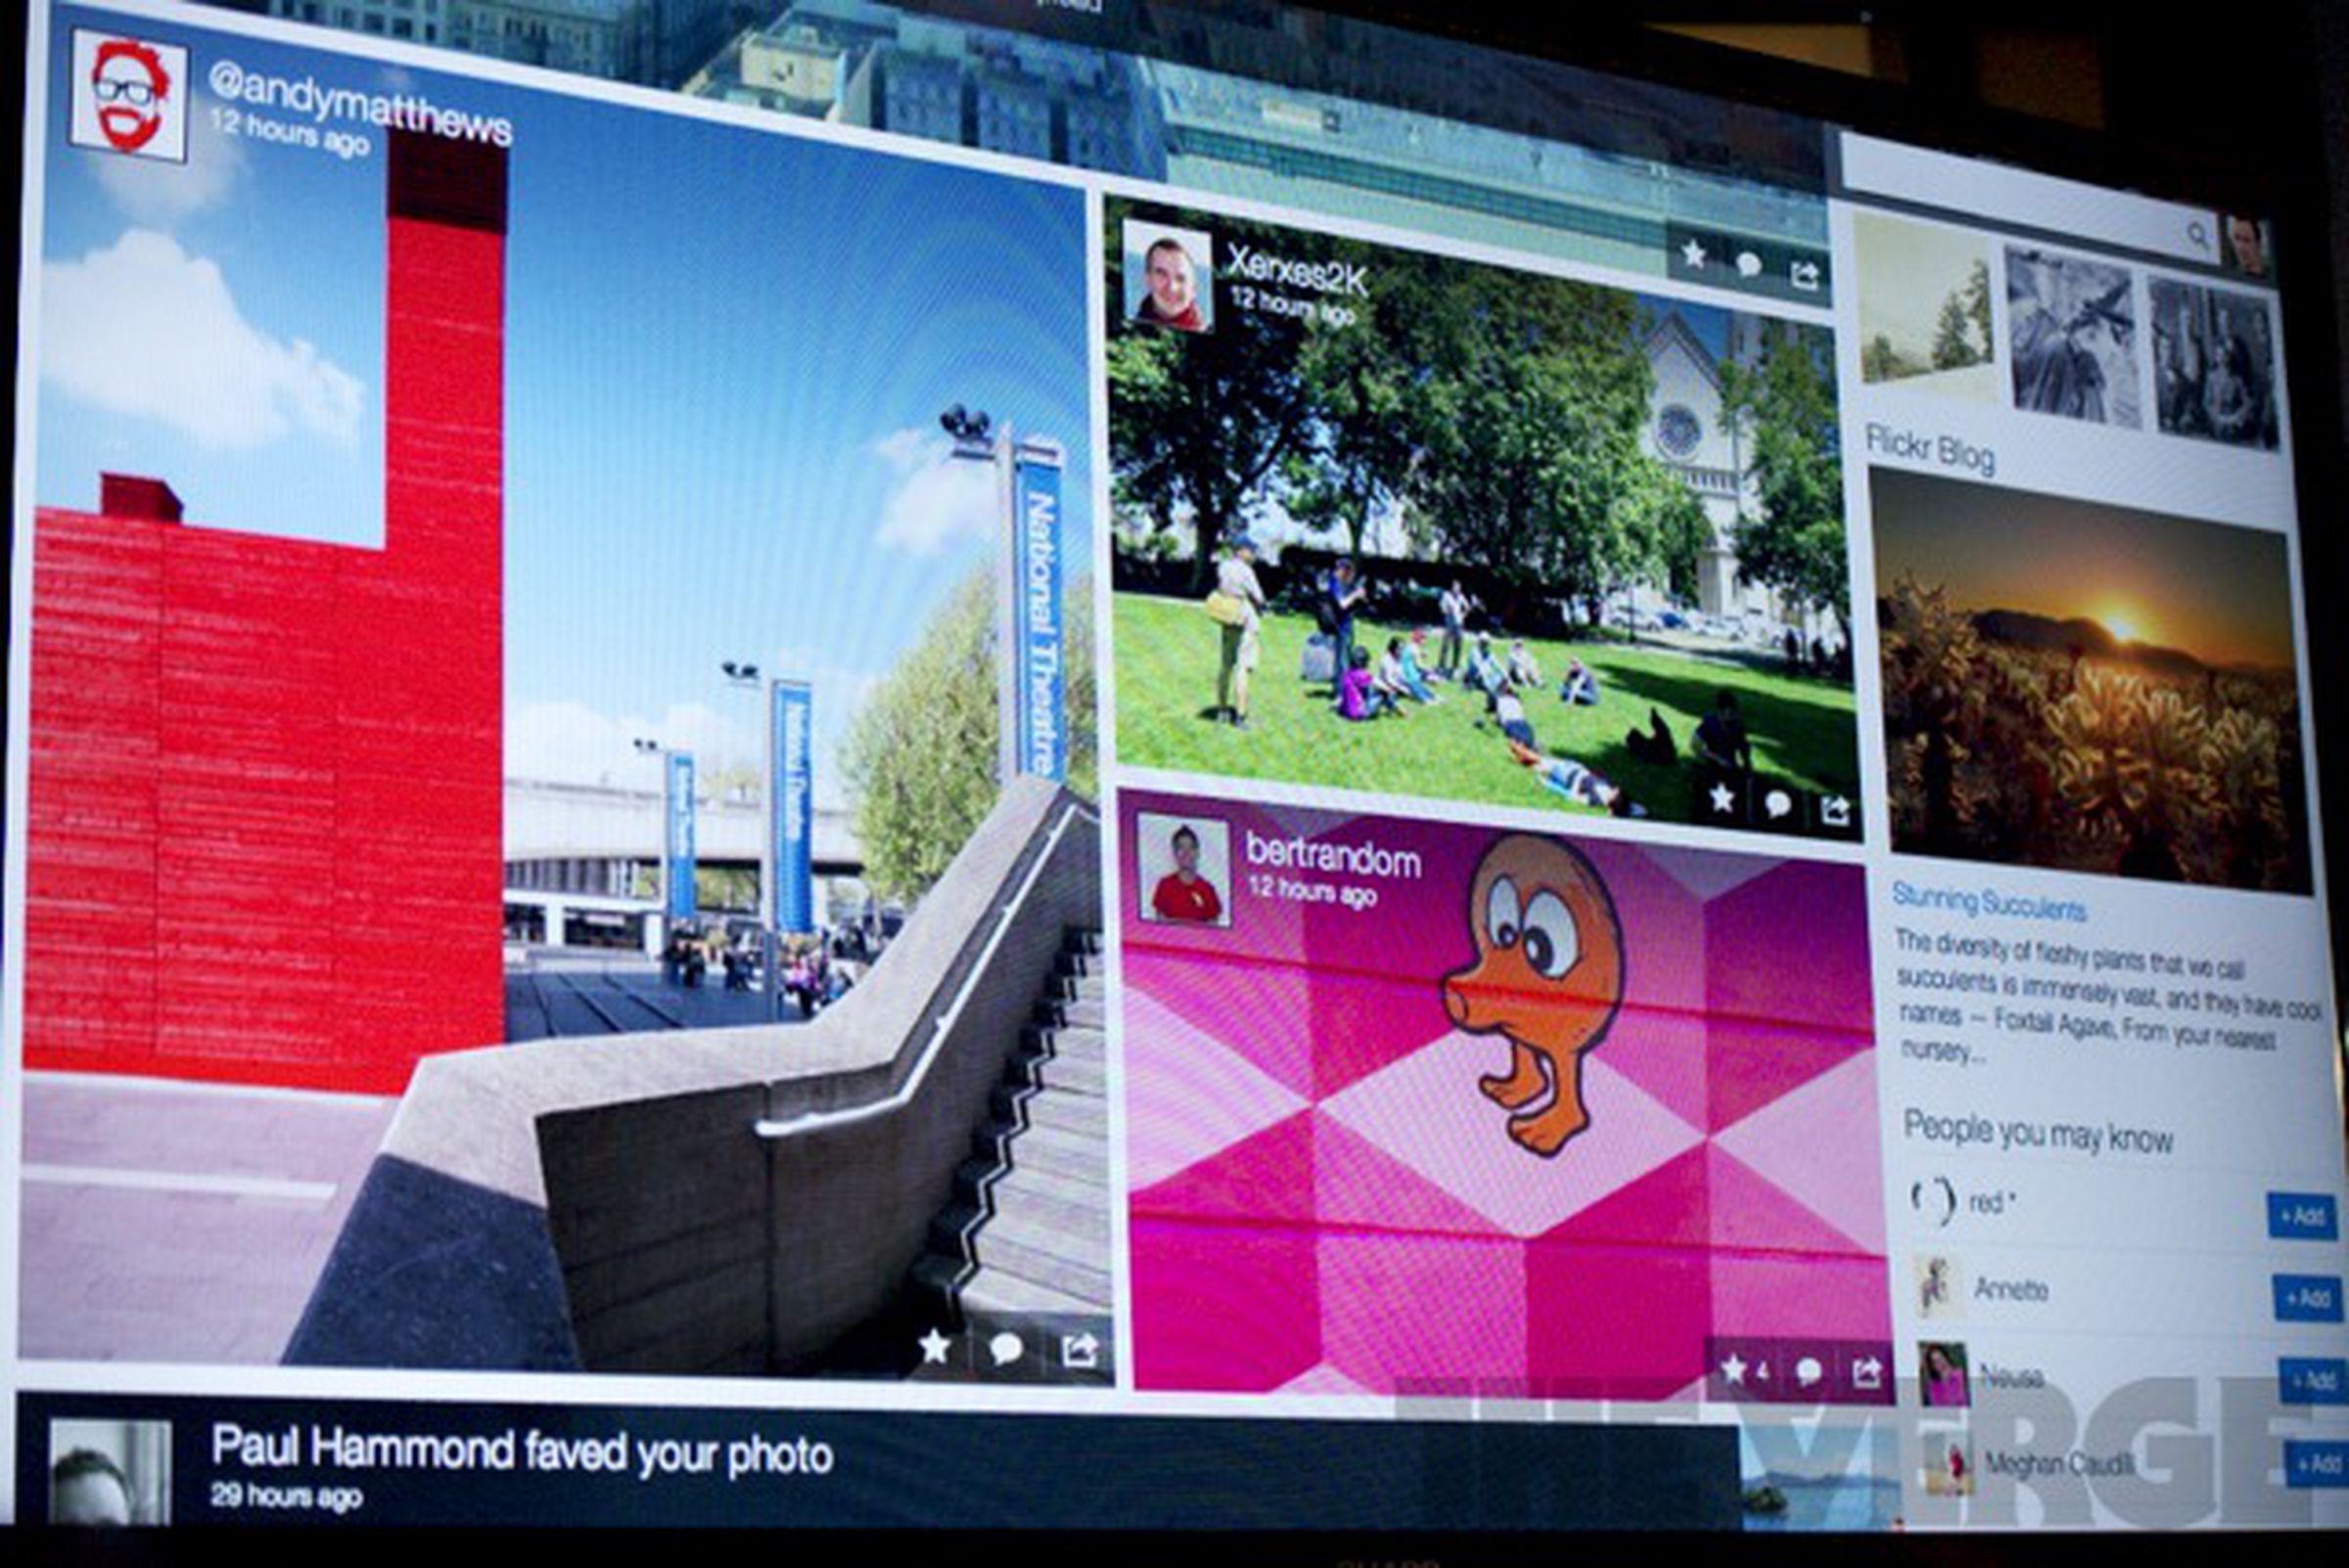 Yahoo redesigns Flickr for the web (photos)